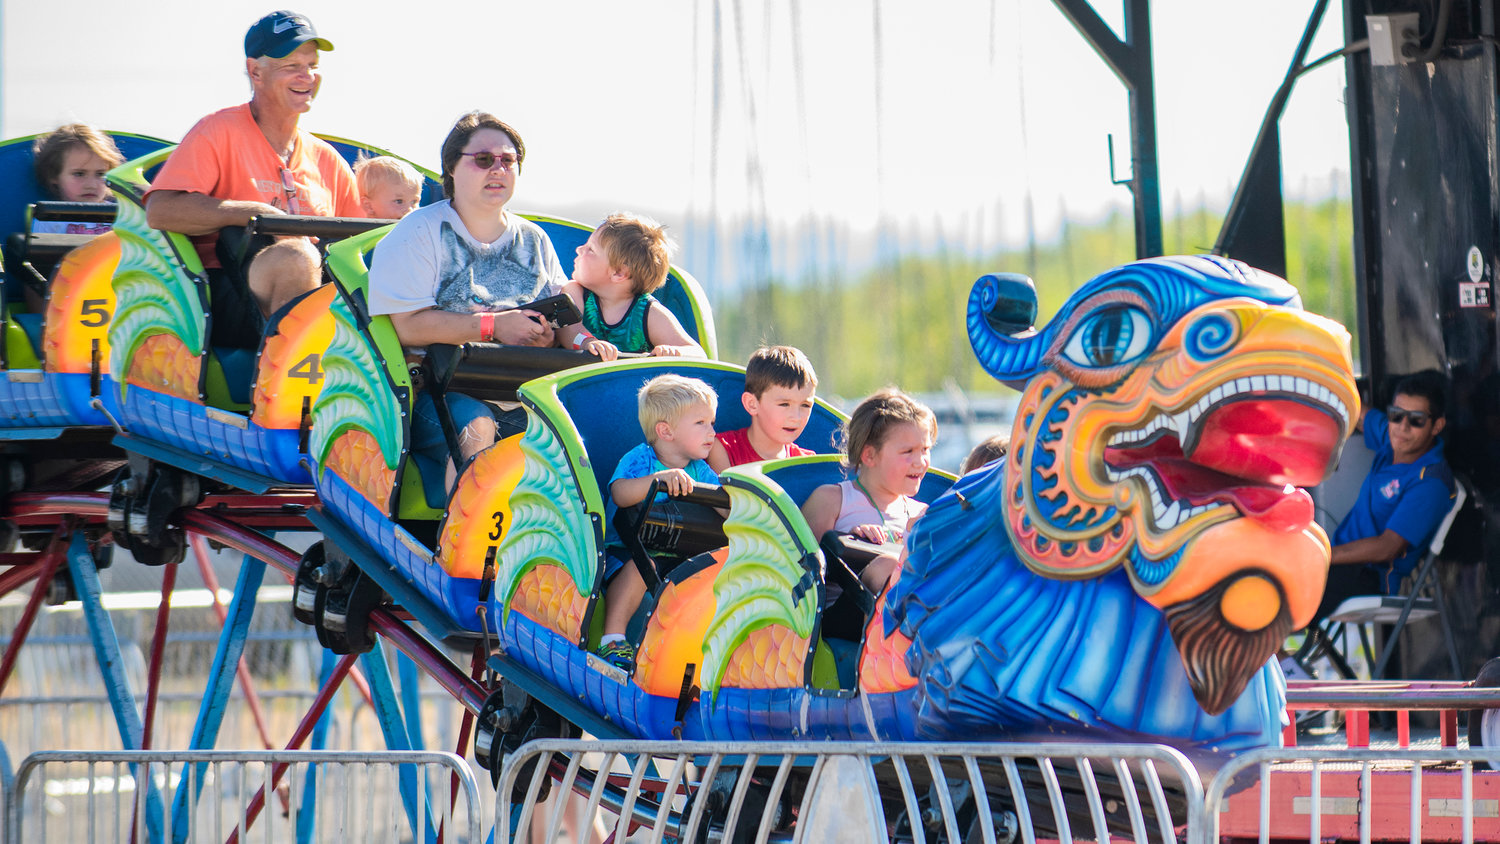 A rollercoaster takes passengers on a ride at the Southwest Washington Fairgrounds Tuesday evening in Centralia.